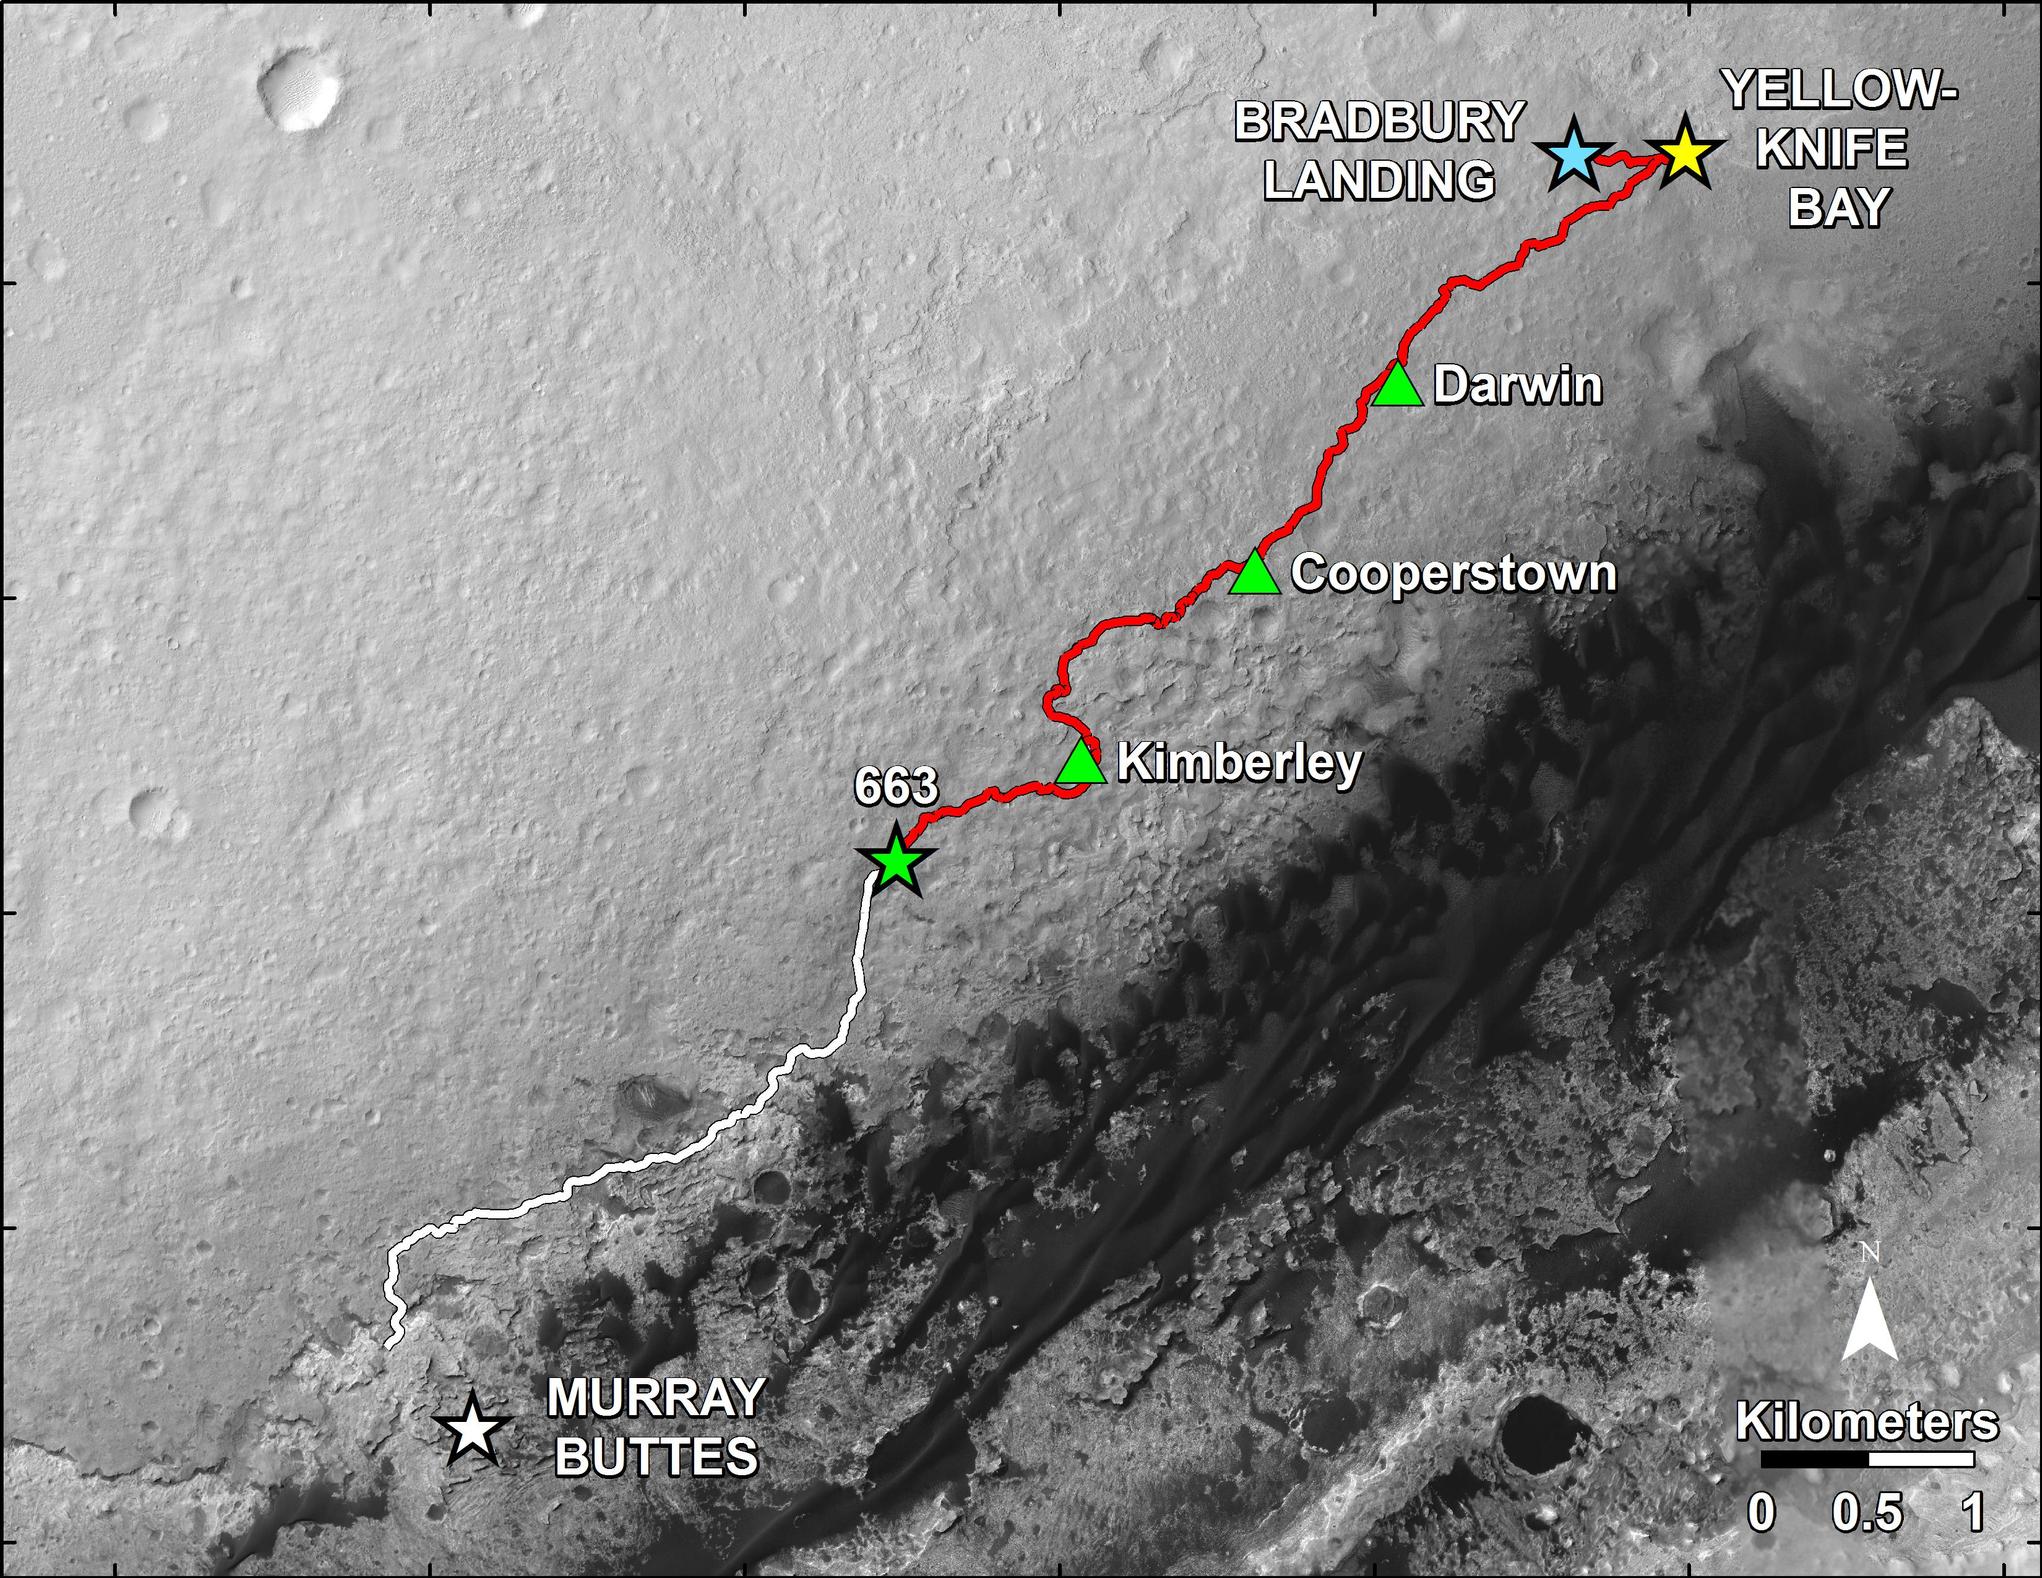 This map shows in red the route driven by NASA's Curiosity Mars rover from the "Bradbury Landing" location where it landed in August 2012 to nearly the completion of its first Martian year. The white line shows the planned route ahead. The rover's June 18, 2014, location is marked as 663.